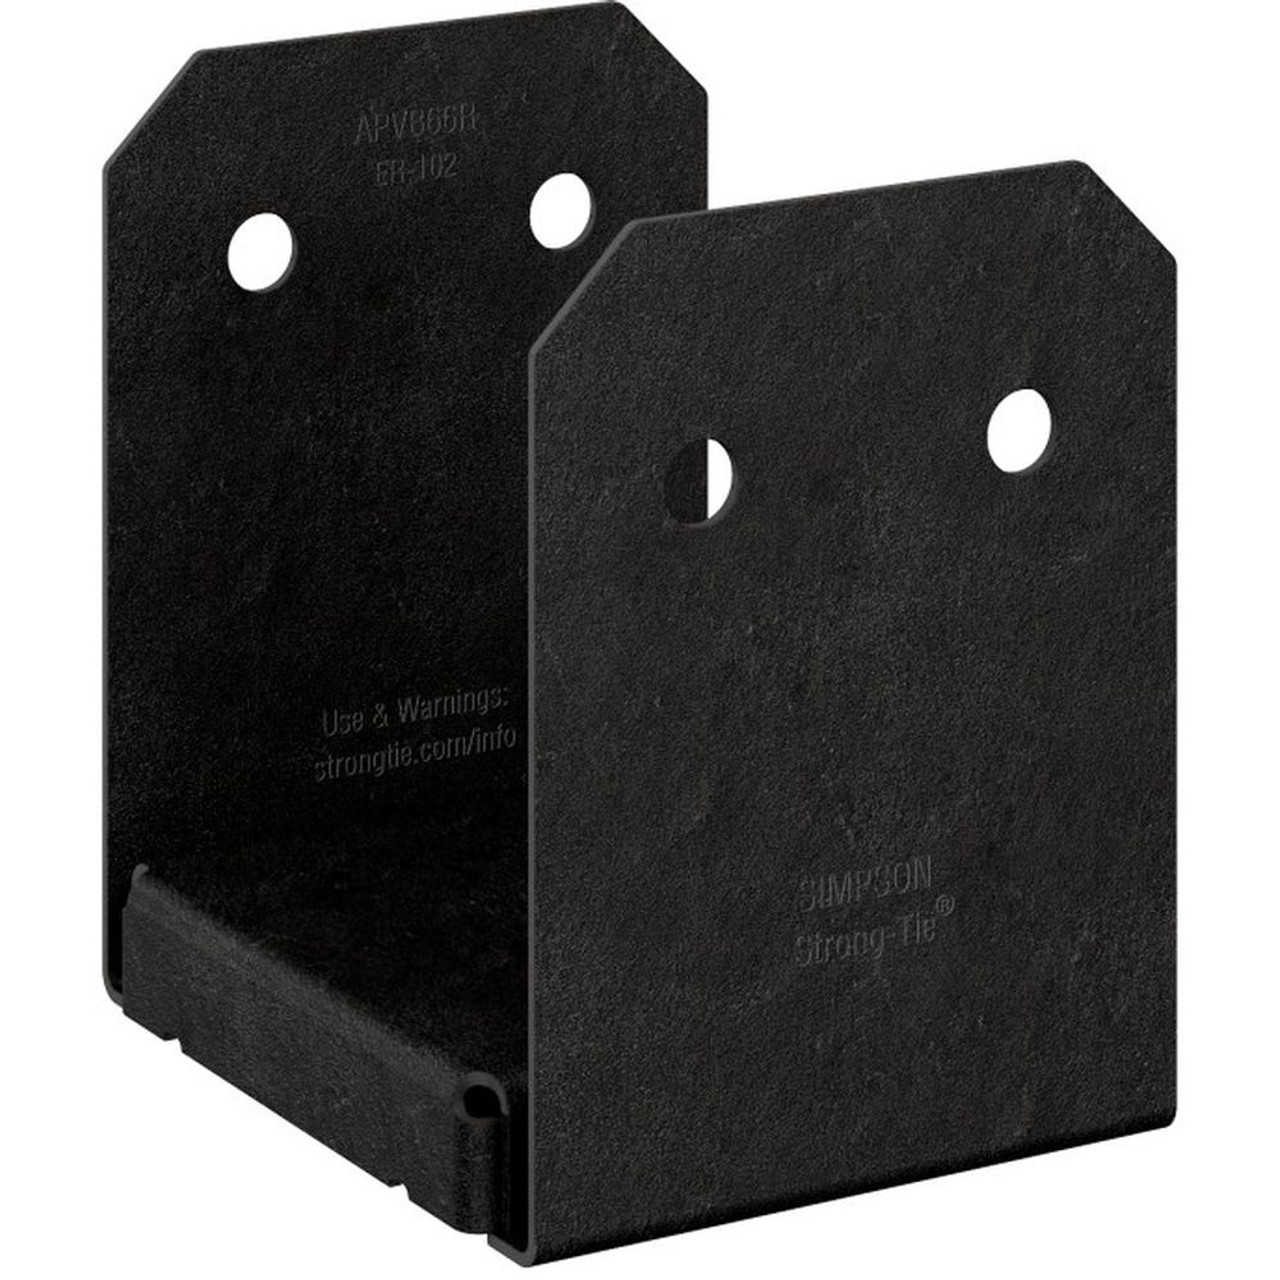 Simpson Strong-Tie APVB66R - Outdoor Accents Avant Collection ZMAX, Black  Post Base for 6x6 Rough